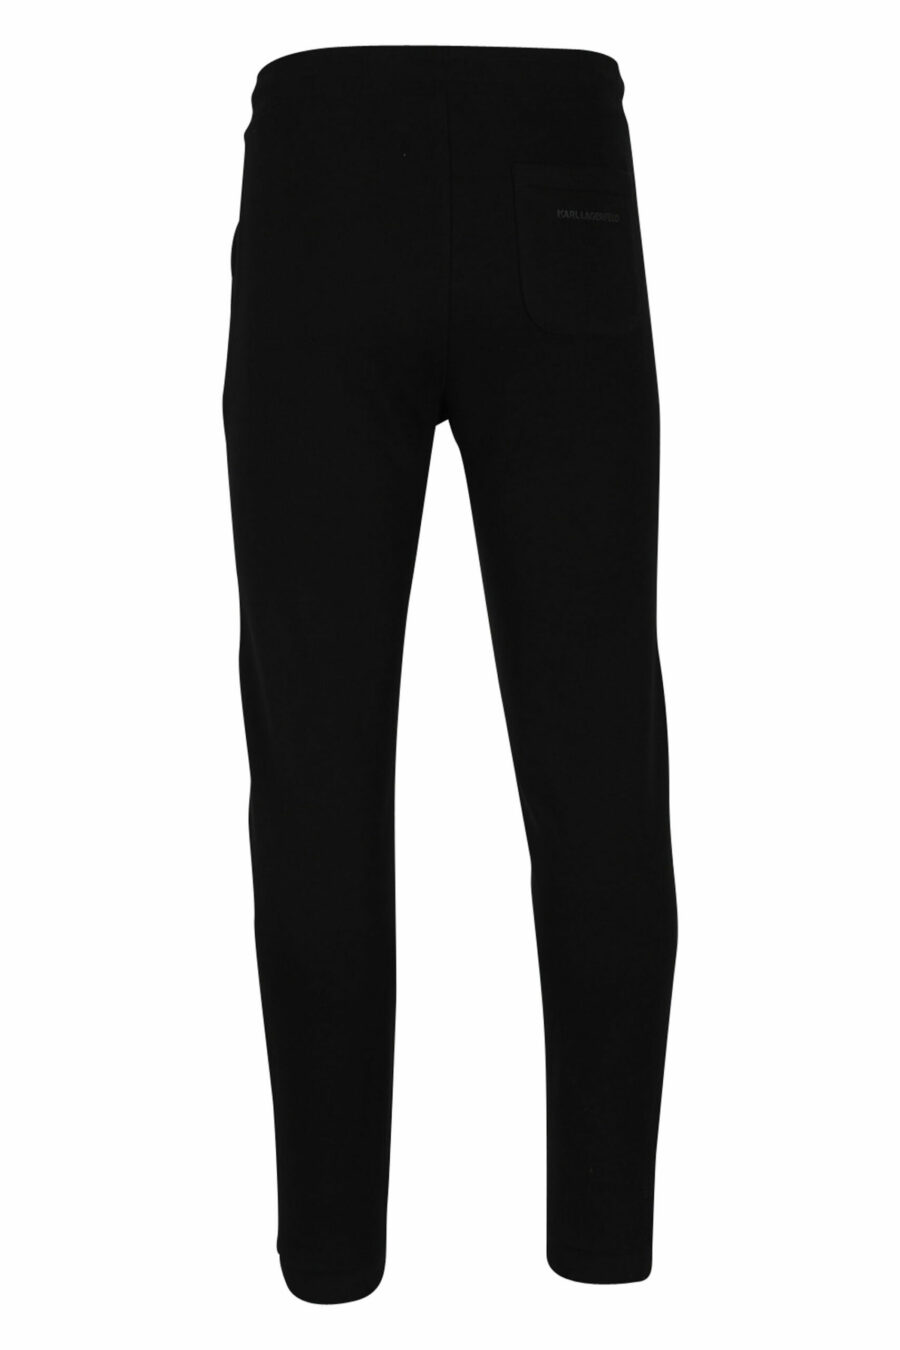 Tracksuit bottoms black with rubber mini-logo - 4062226393898 3 scaled